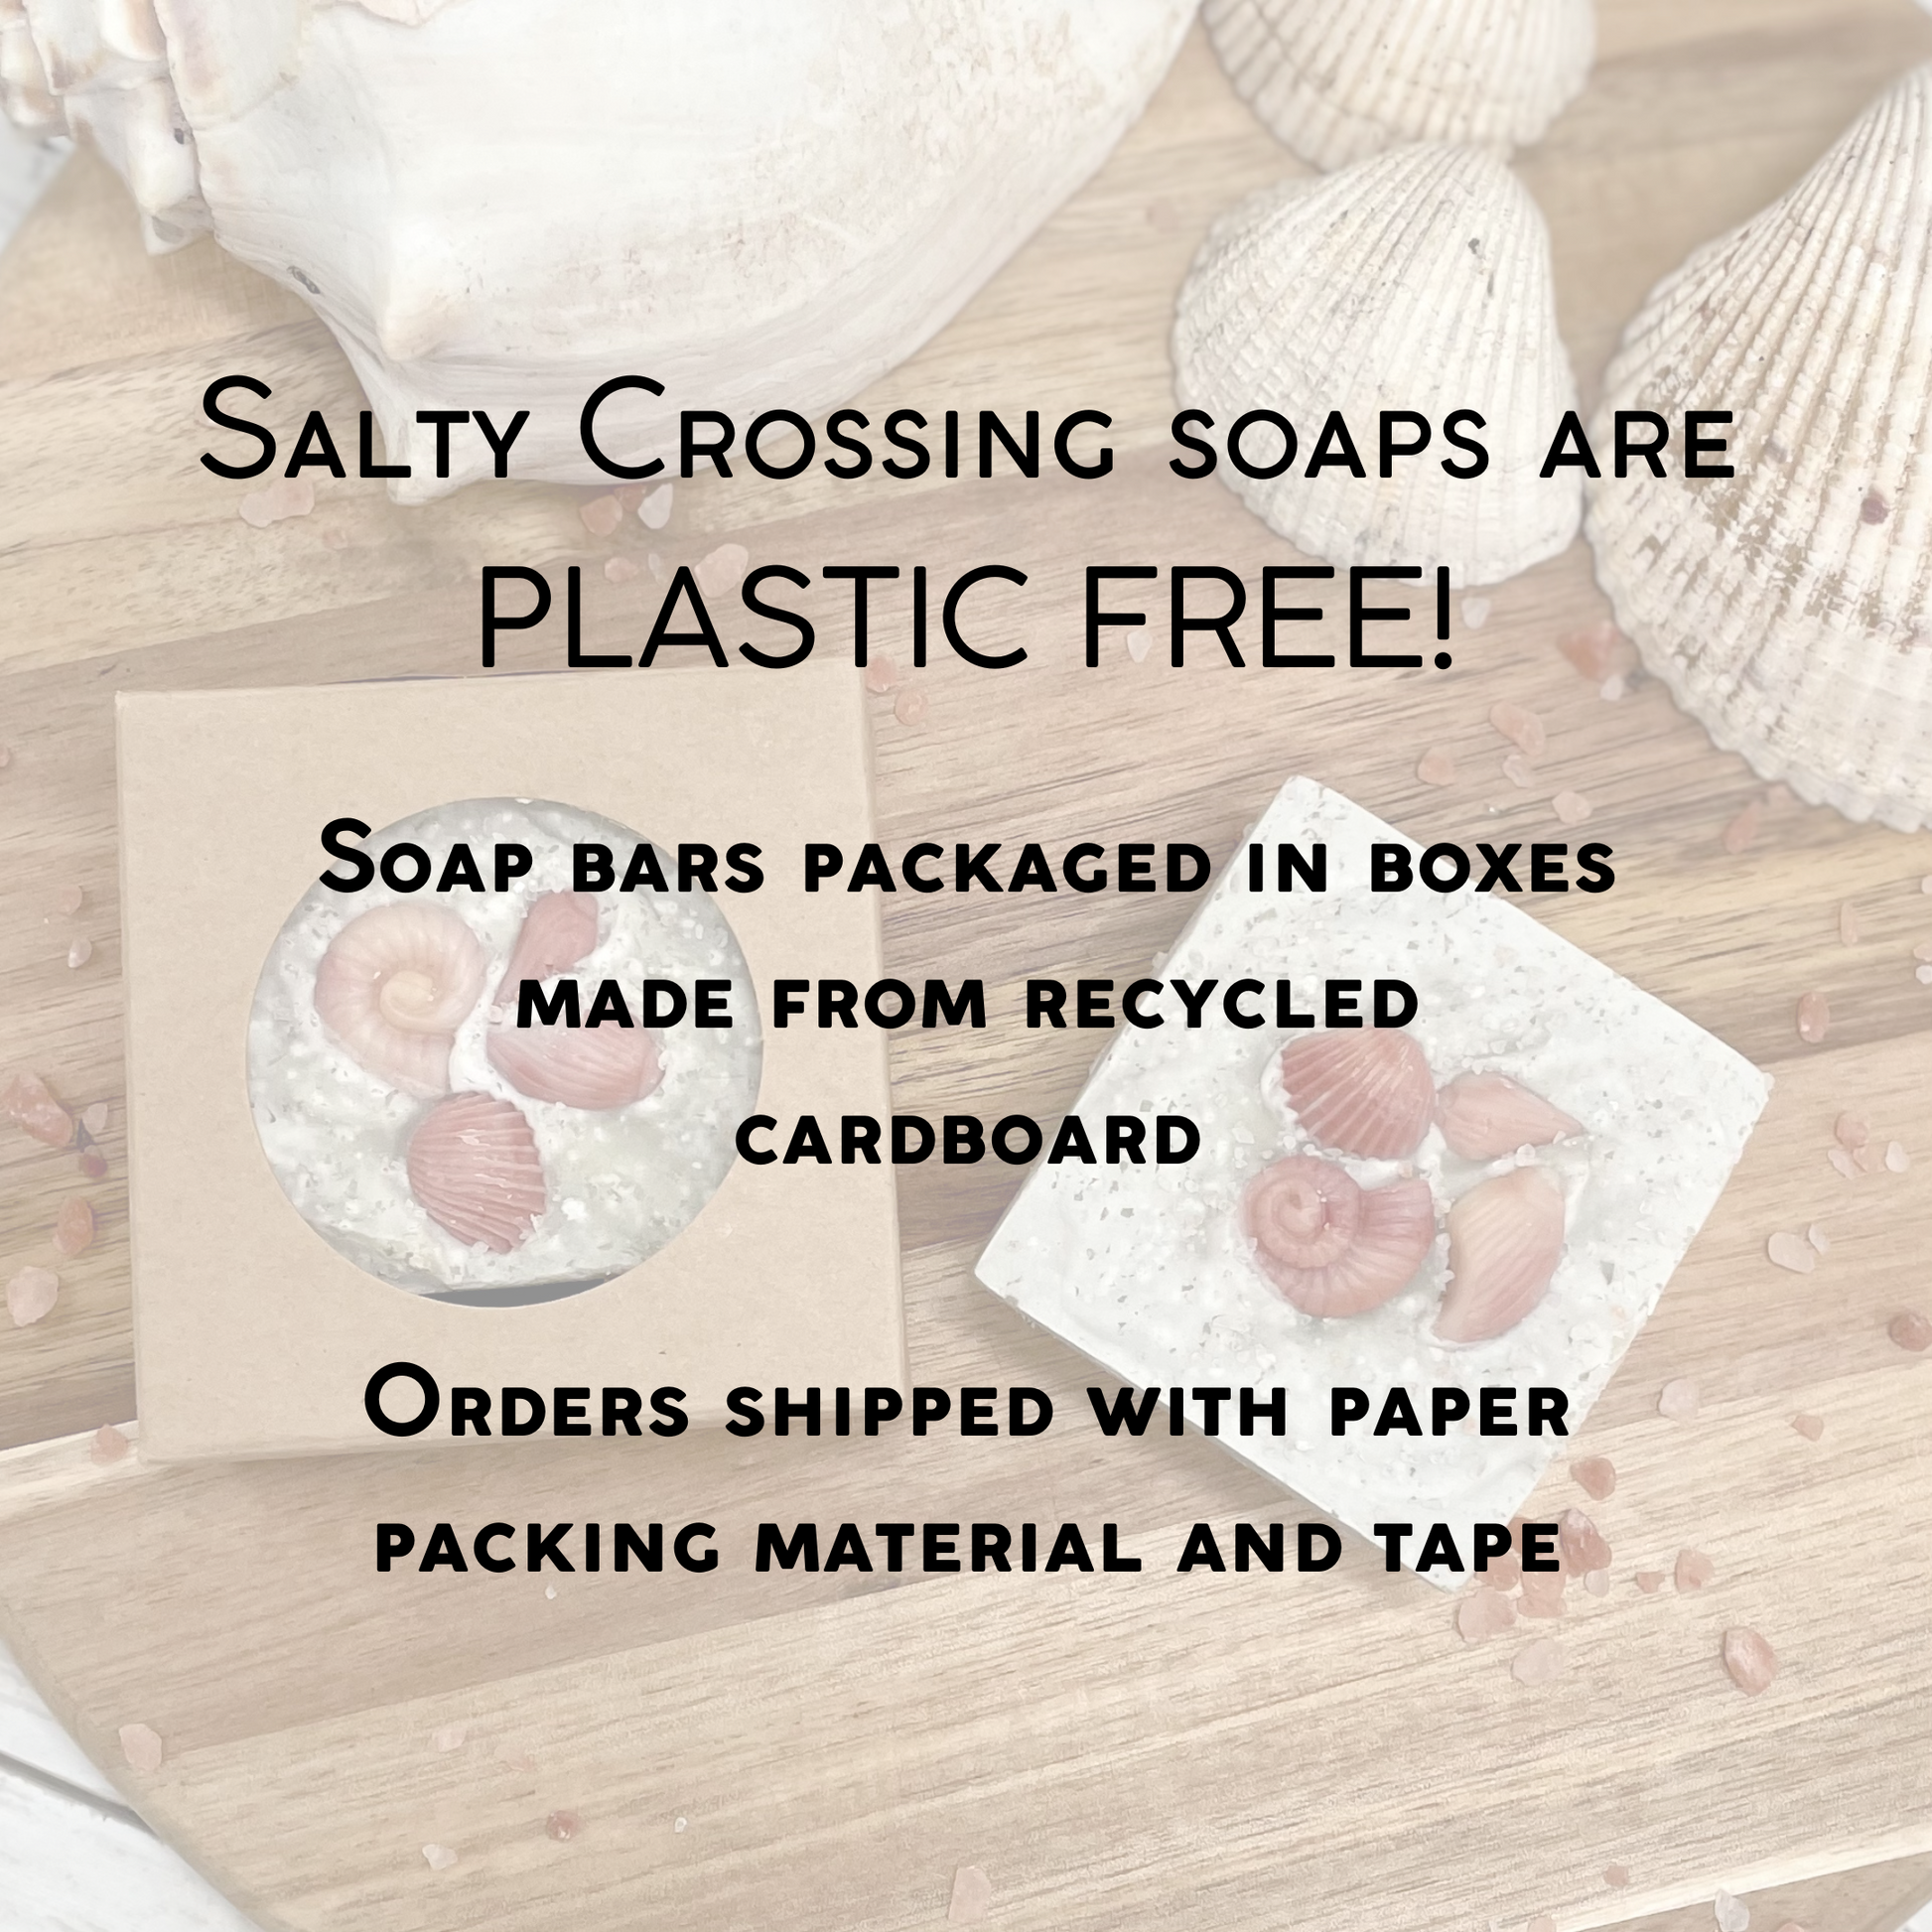 plastic free graphic. salty crossing soaps are plastic free. soap bars packaged in boxes made from recycled cardboard. orders shipped with paper packing material and tape.